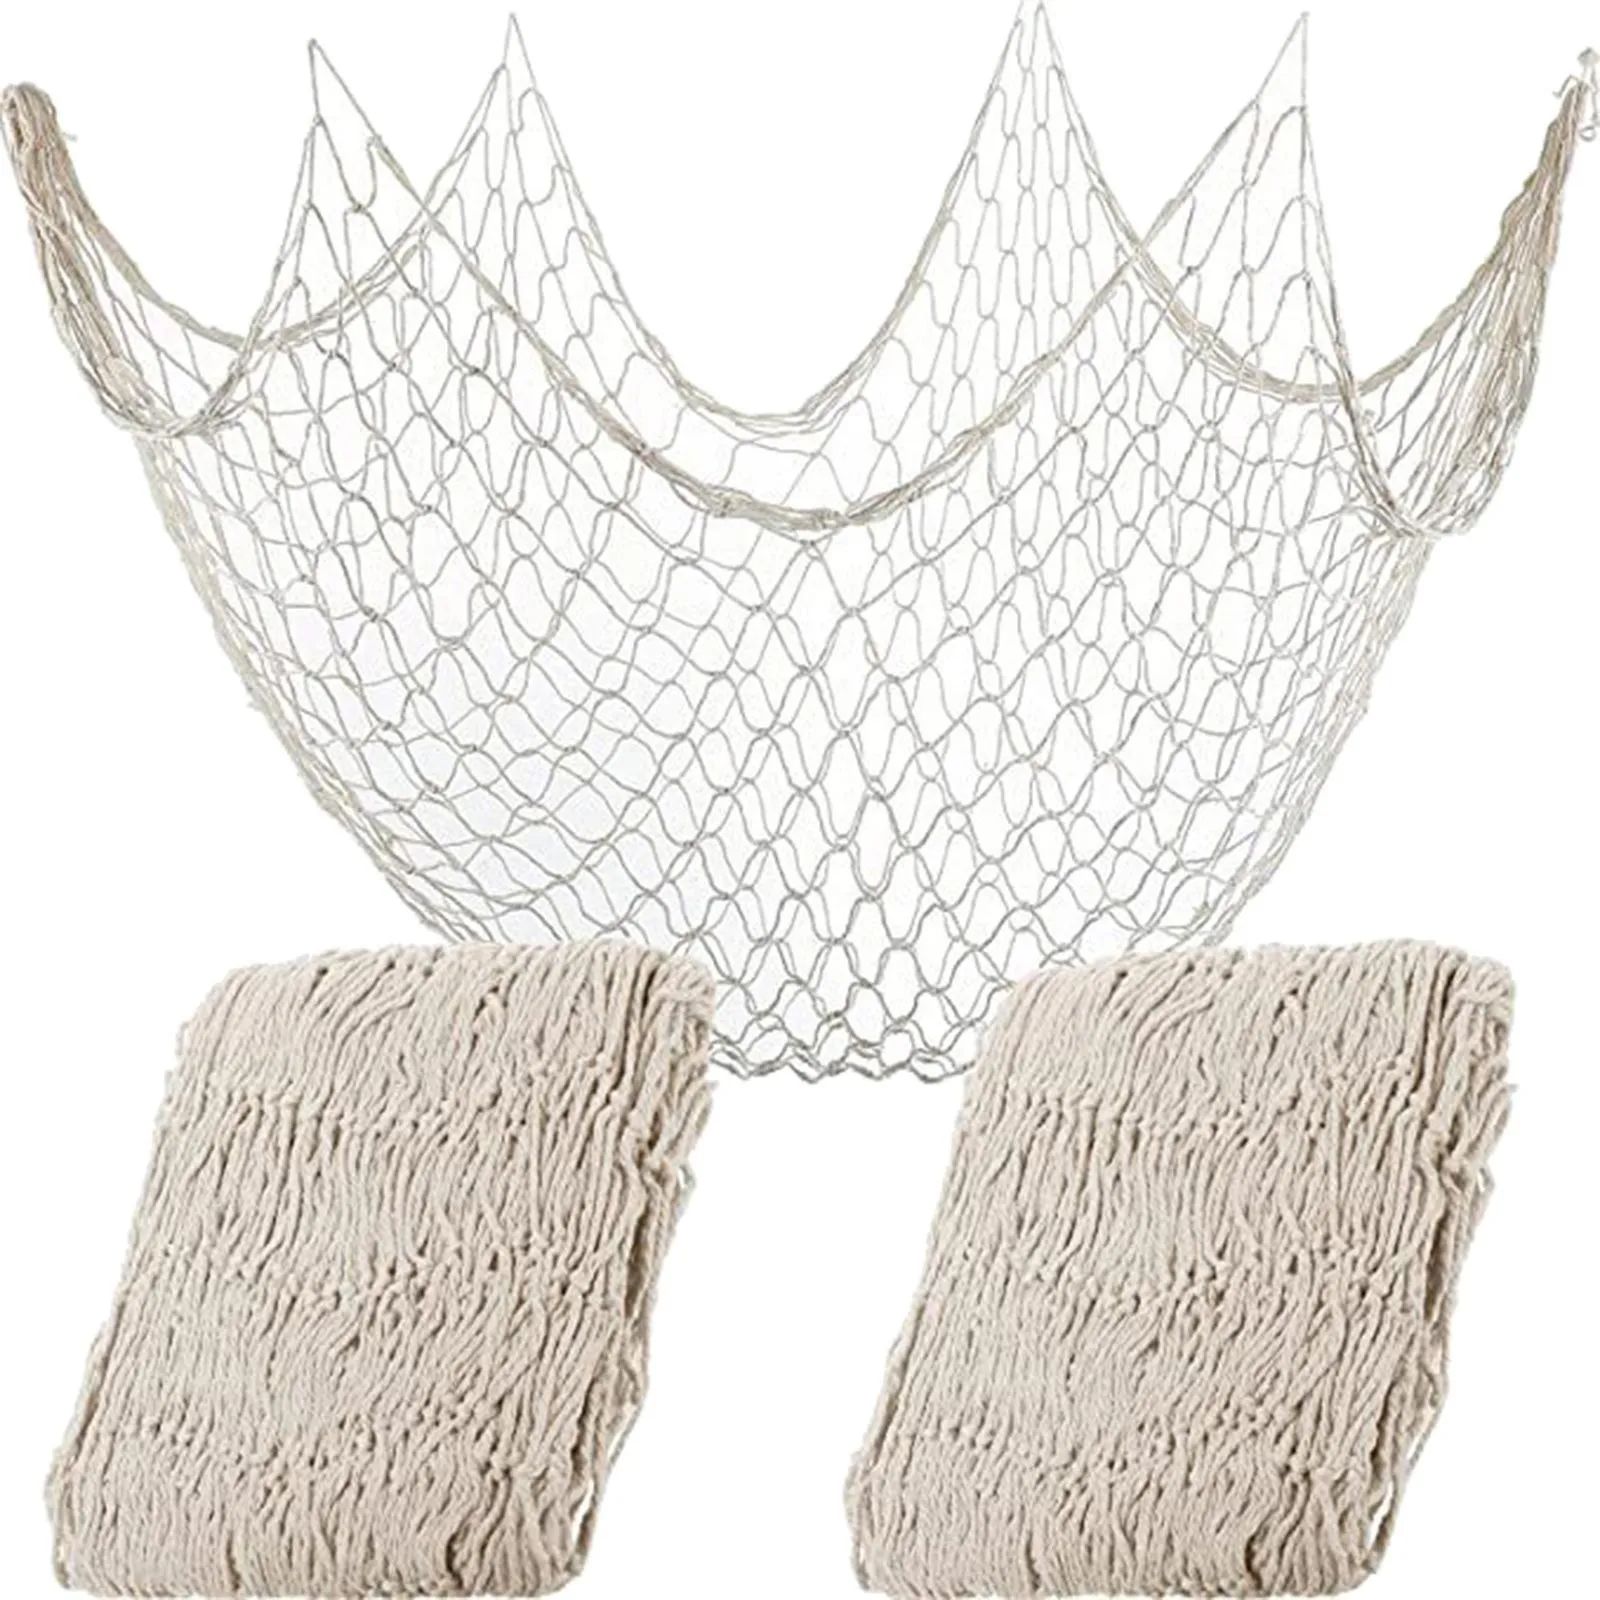 2 Pieces Fish Net Decorative 80 X 40 Inch Wall Hanging Fishnet